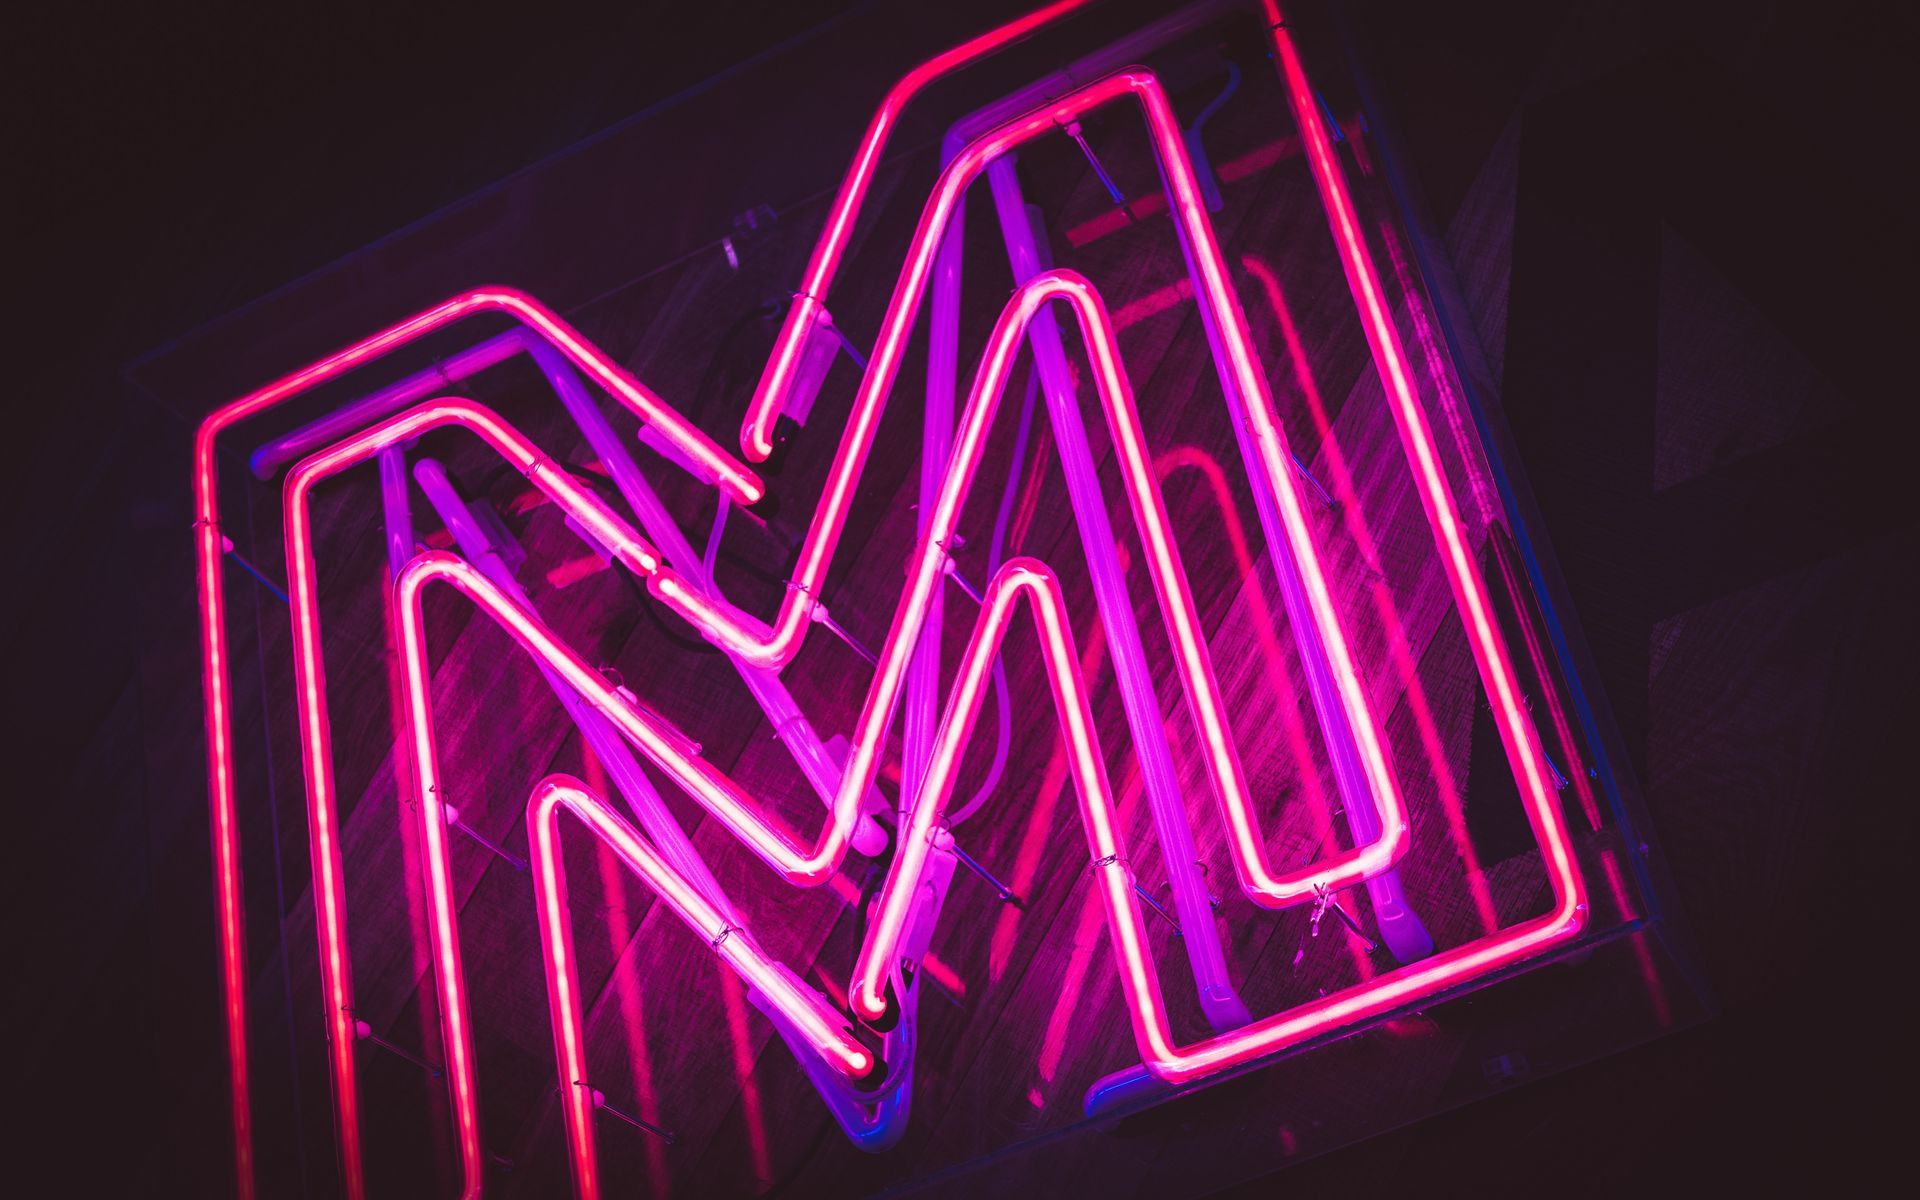 A series of neon M's in purple, one inside the other - black background